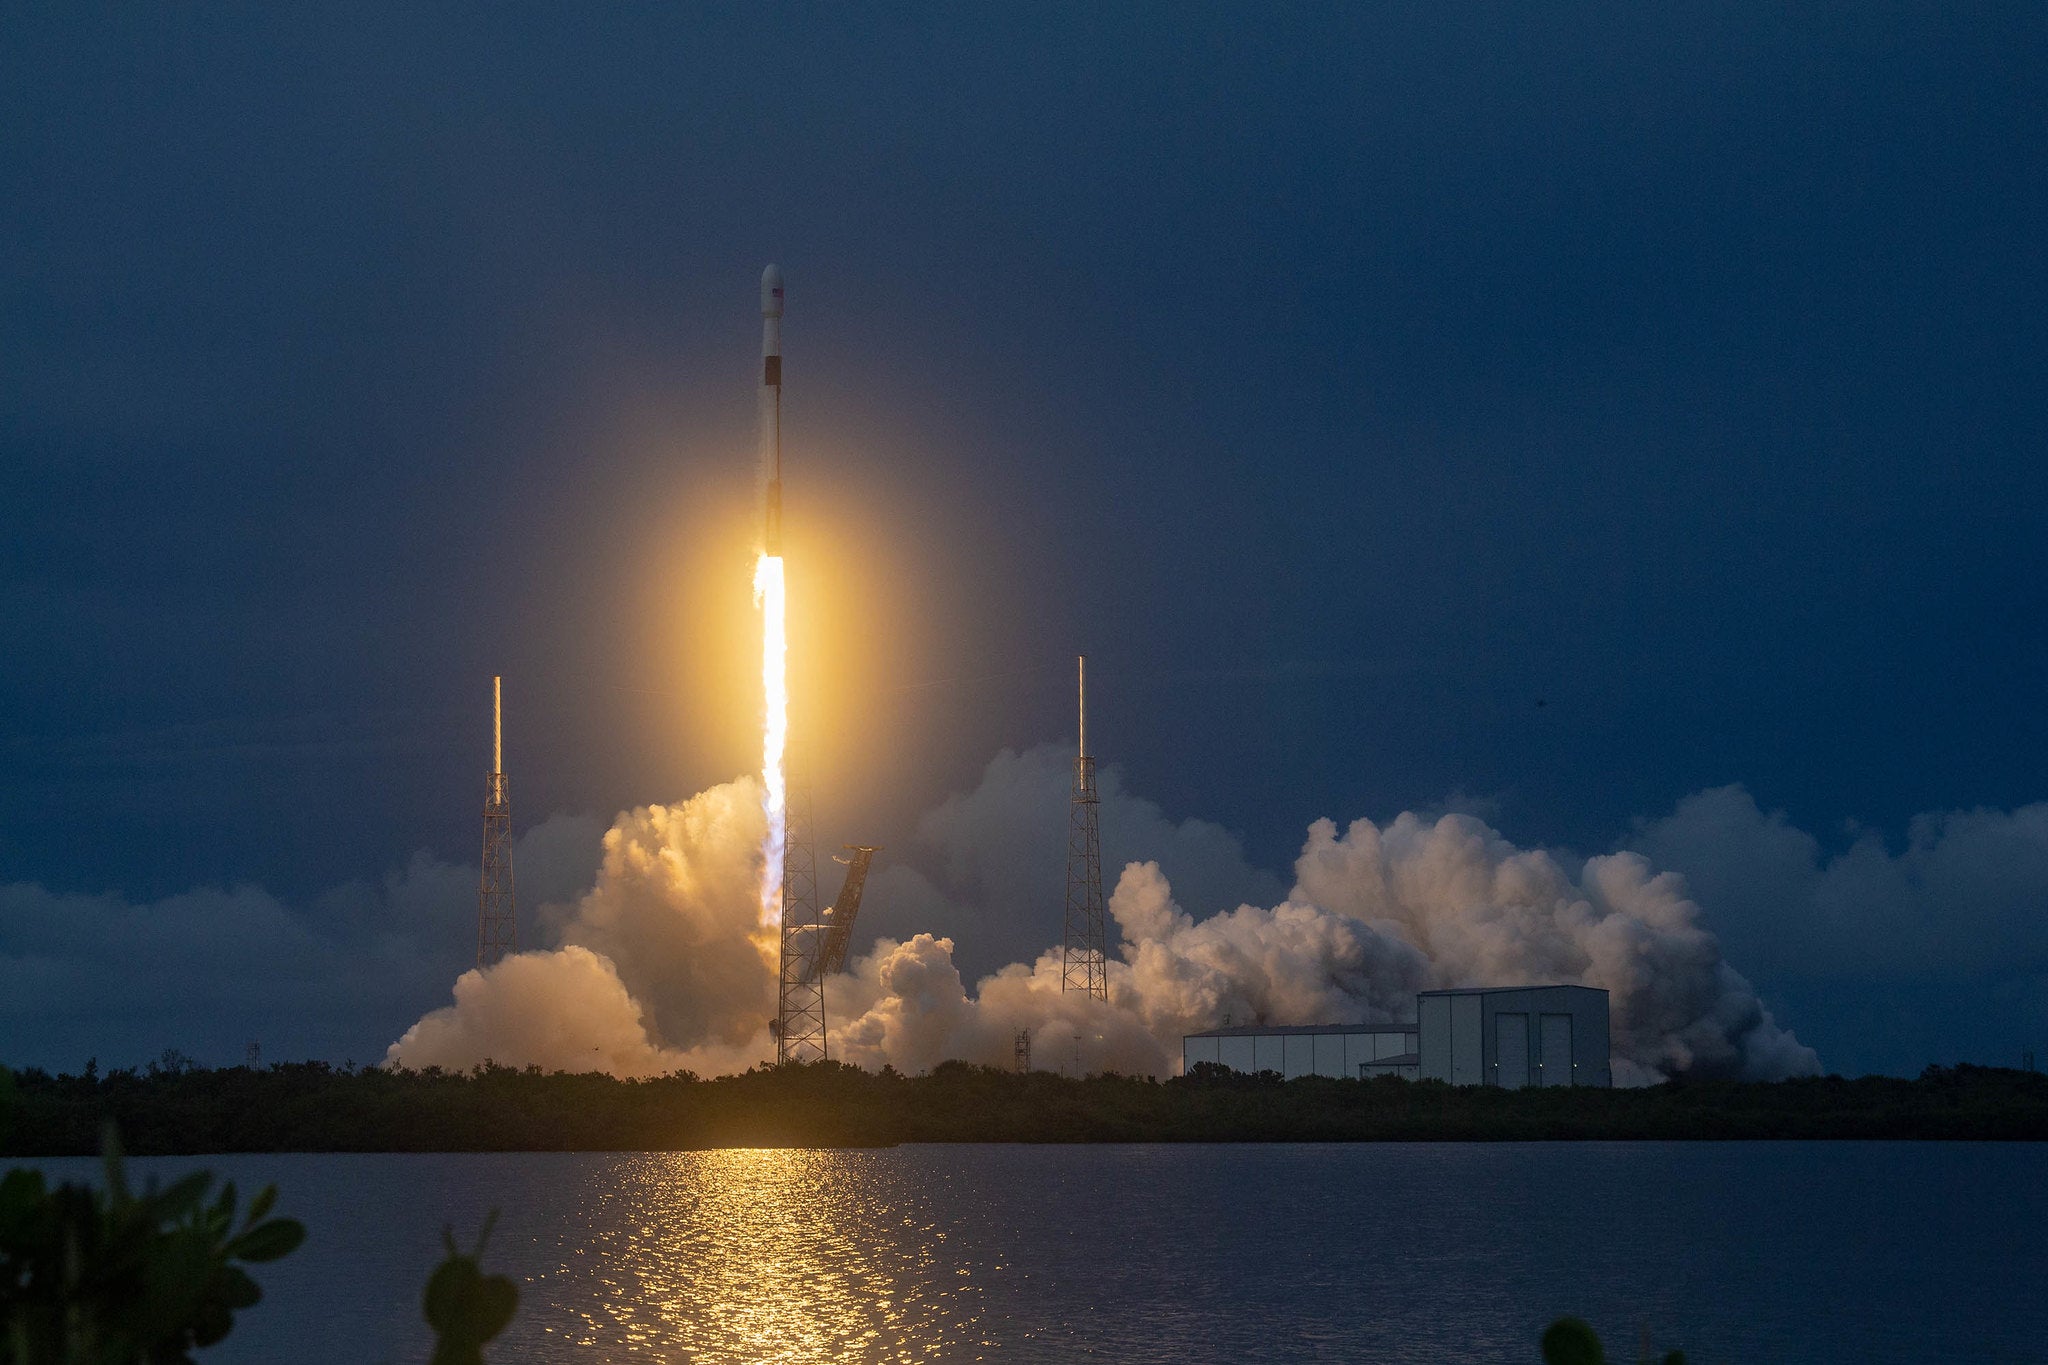 SpaceX secures contracts to deploy the next fleet of SES satellites atop Falcon 9